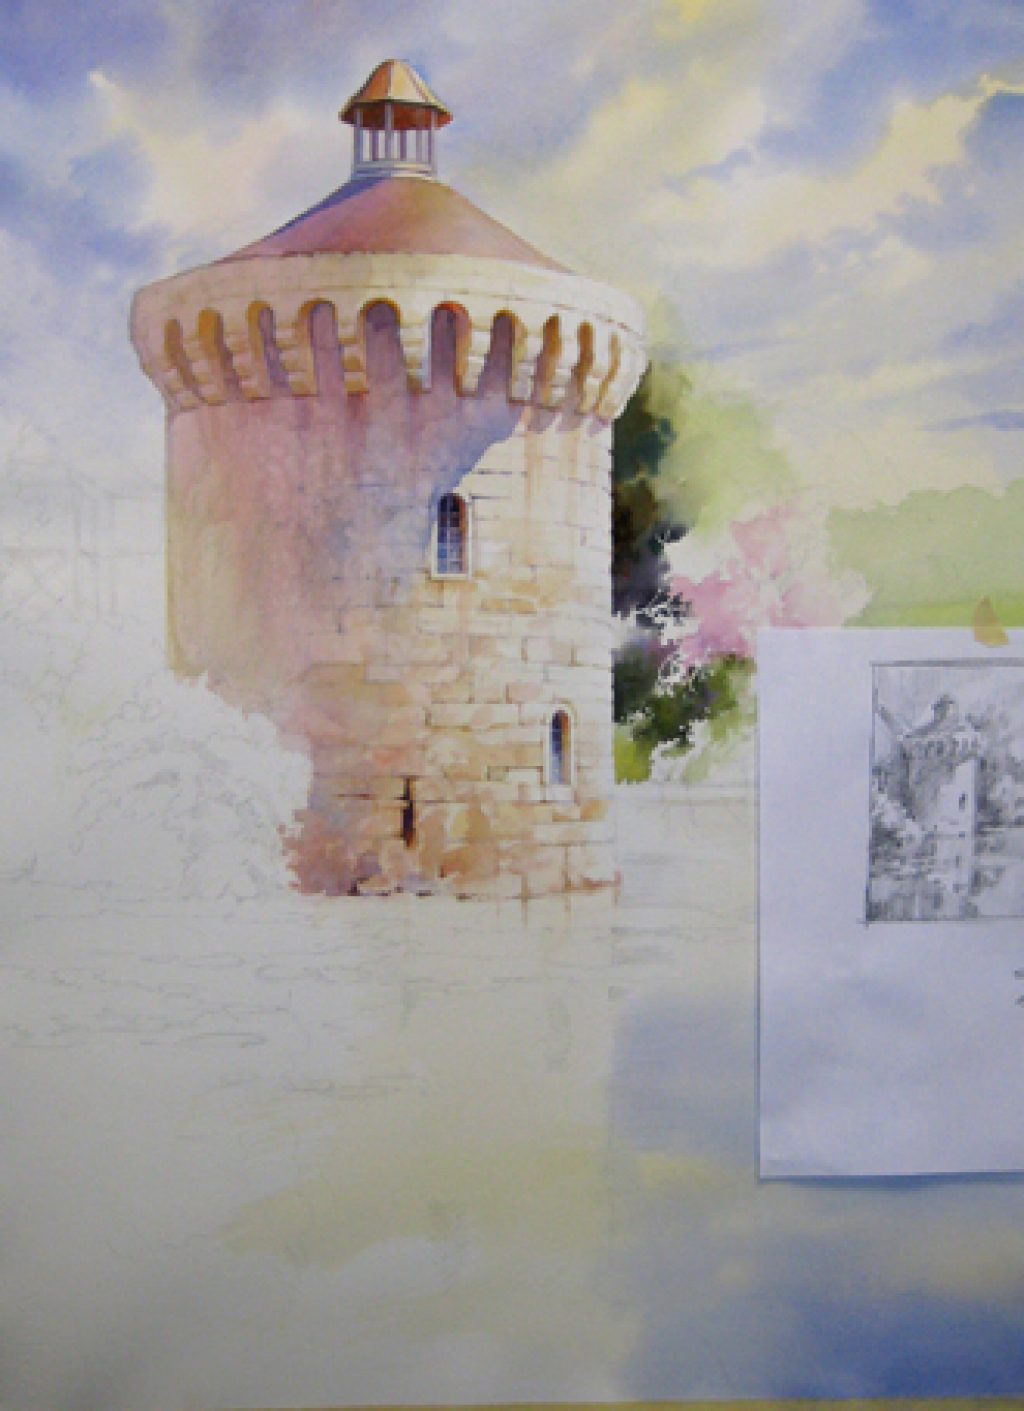 Finished Painting - Watercolor painting of Scotney Tower in England by Roland Lee